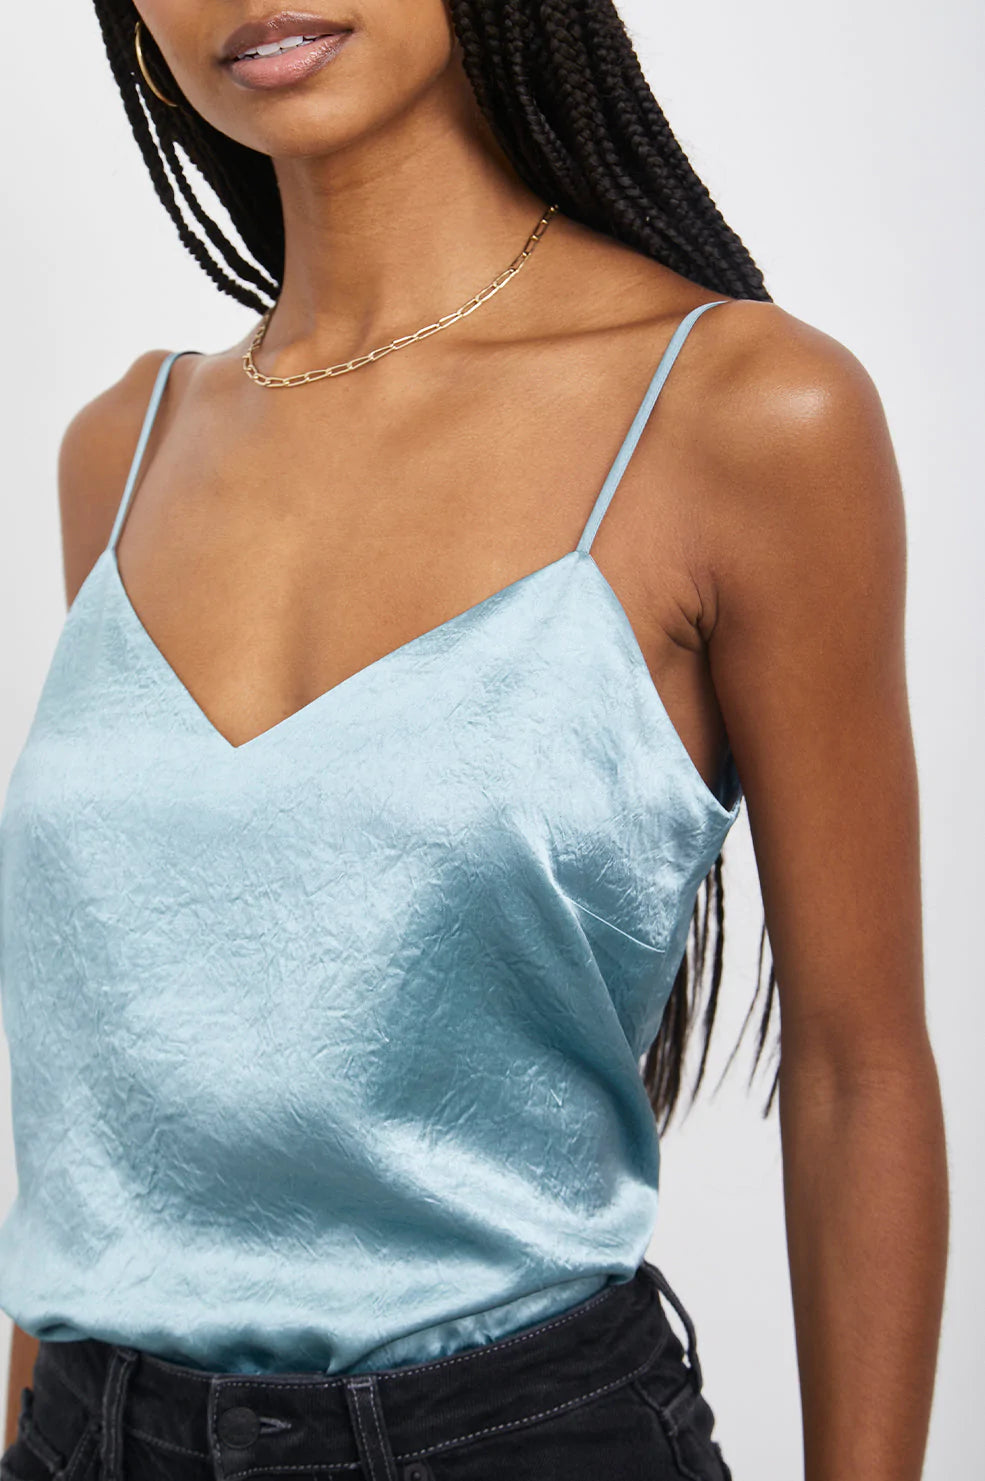 Duck egg blue silky camisole with adjustable straps